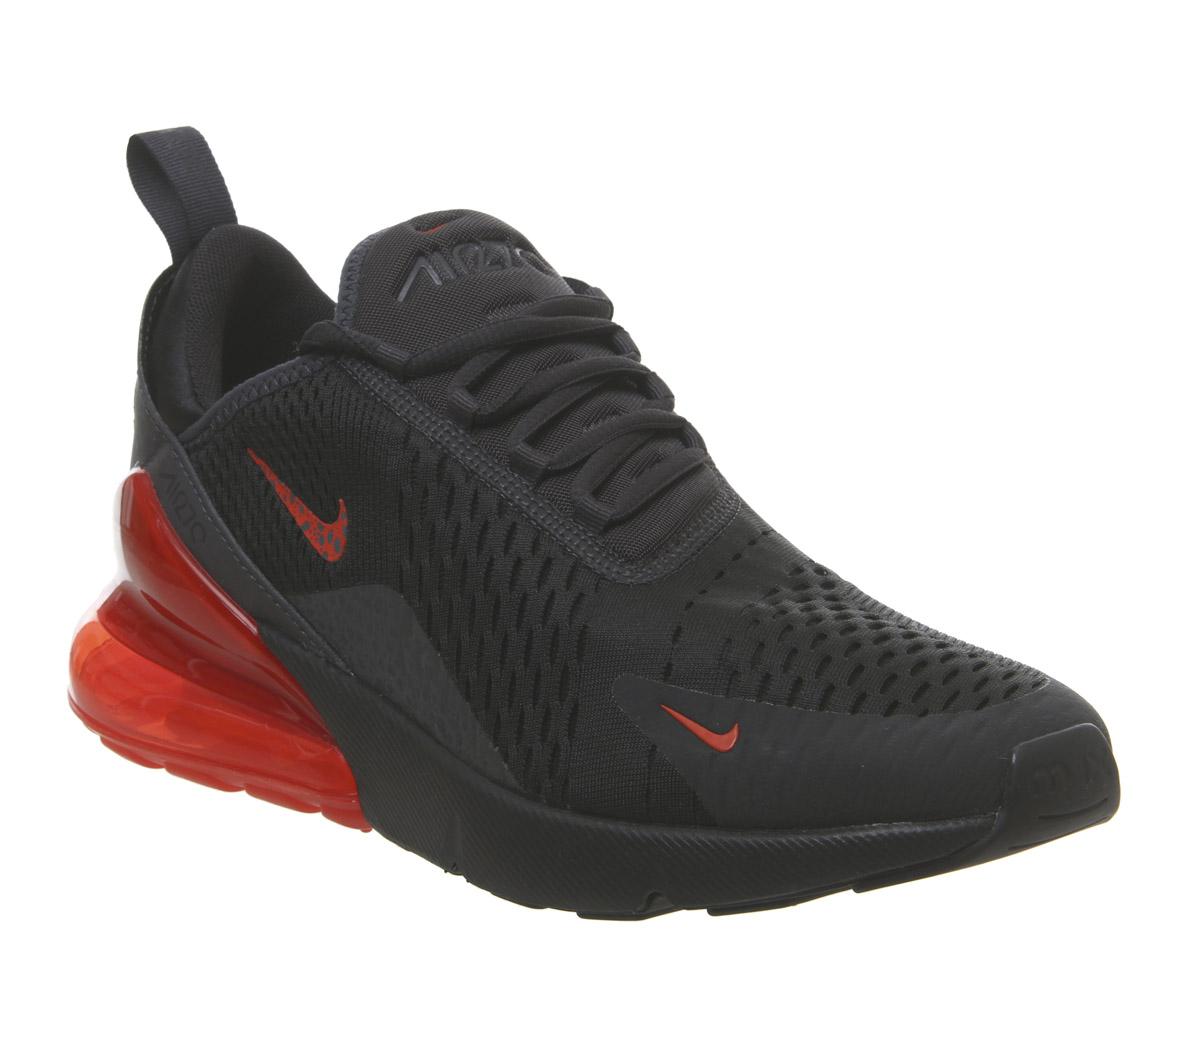 nike air max 270 off noir habanero red